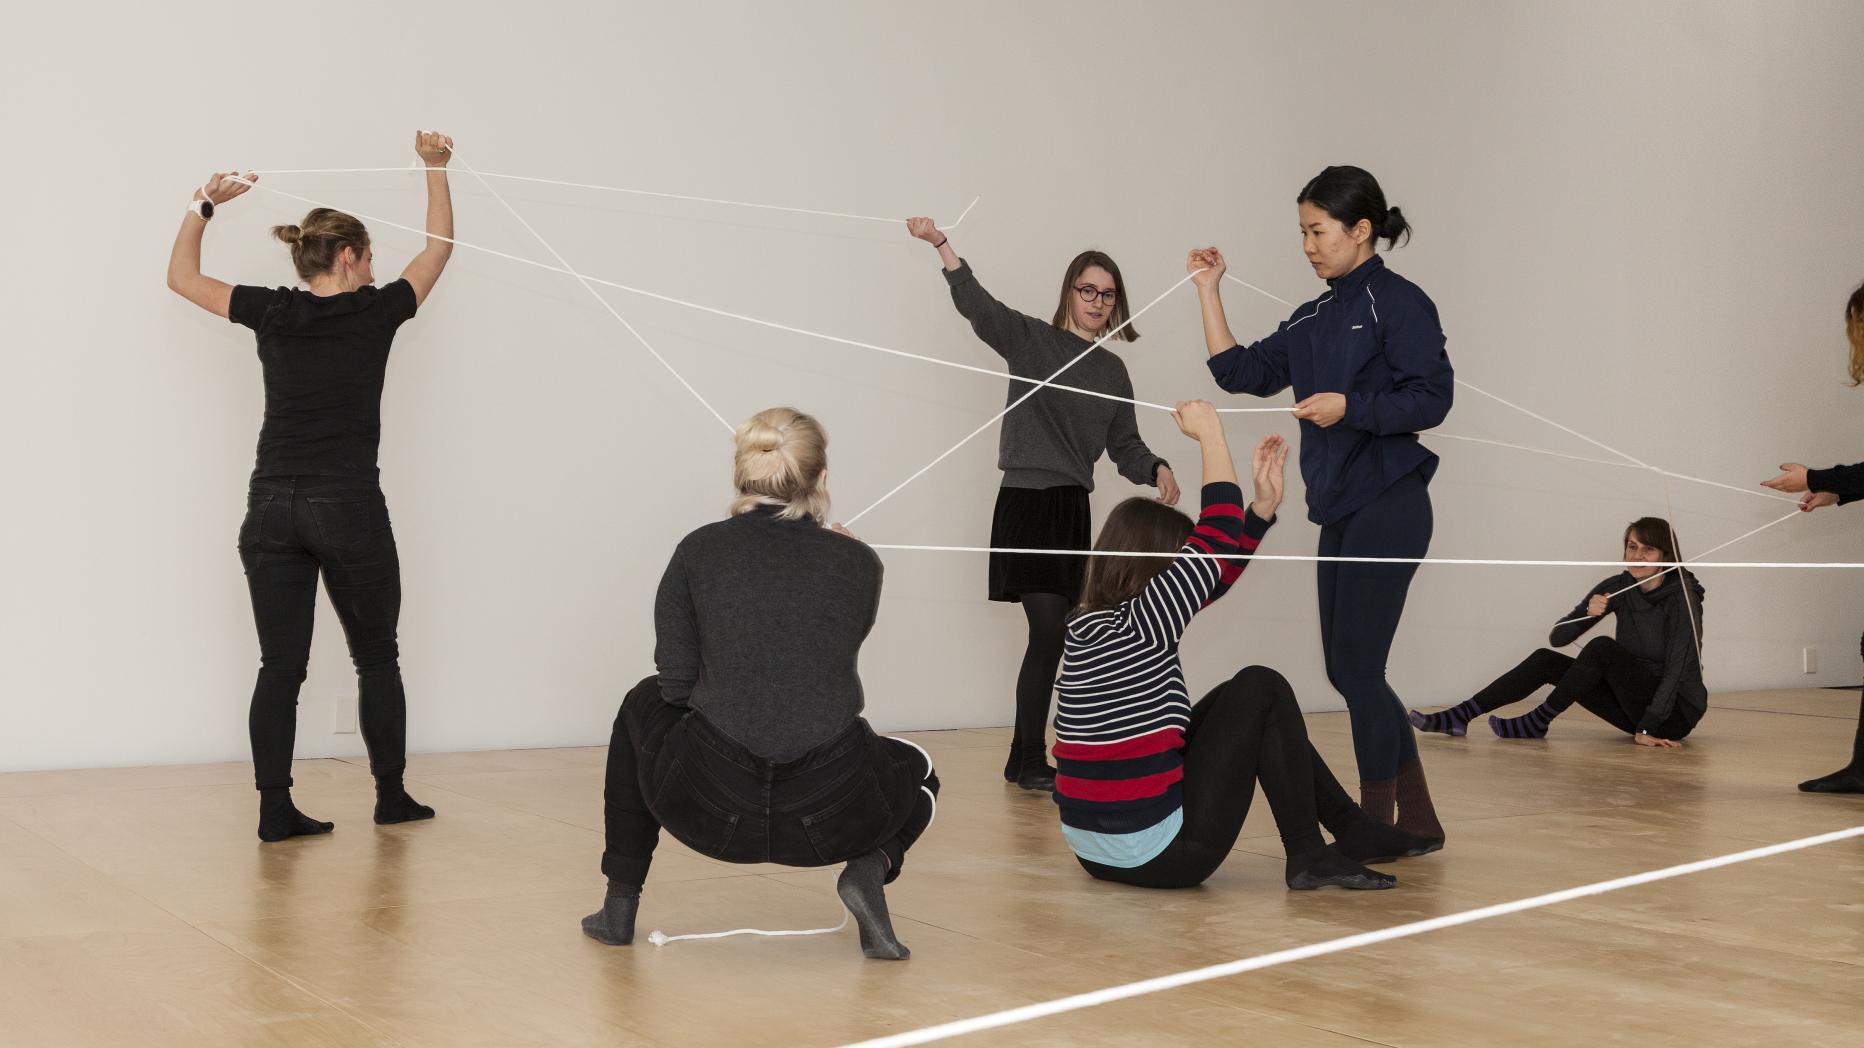 Performers using string as a performance media